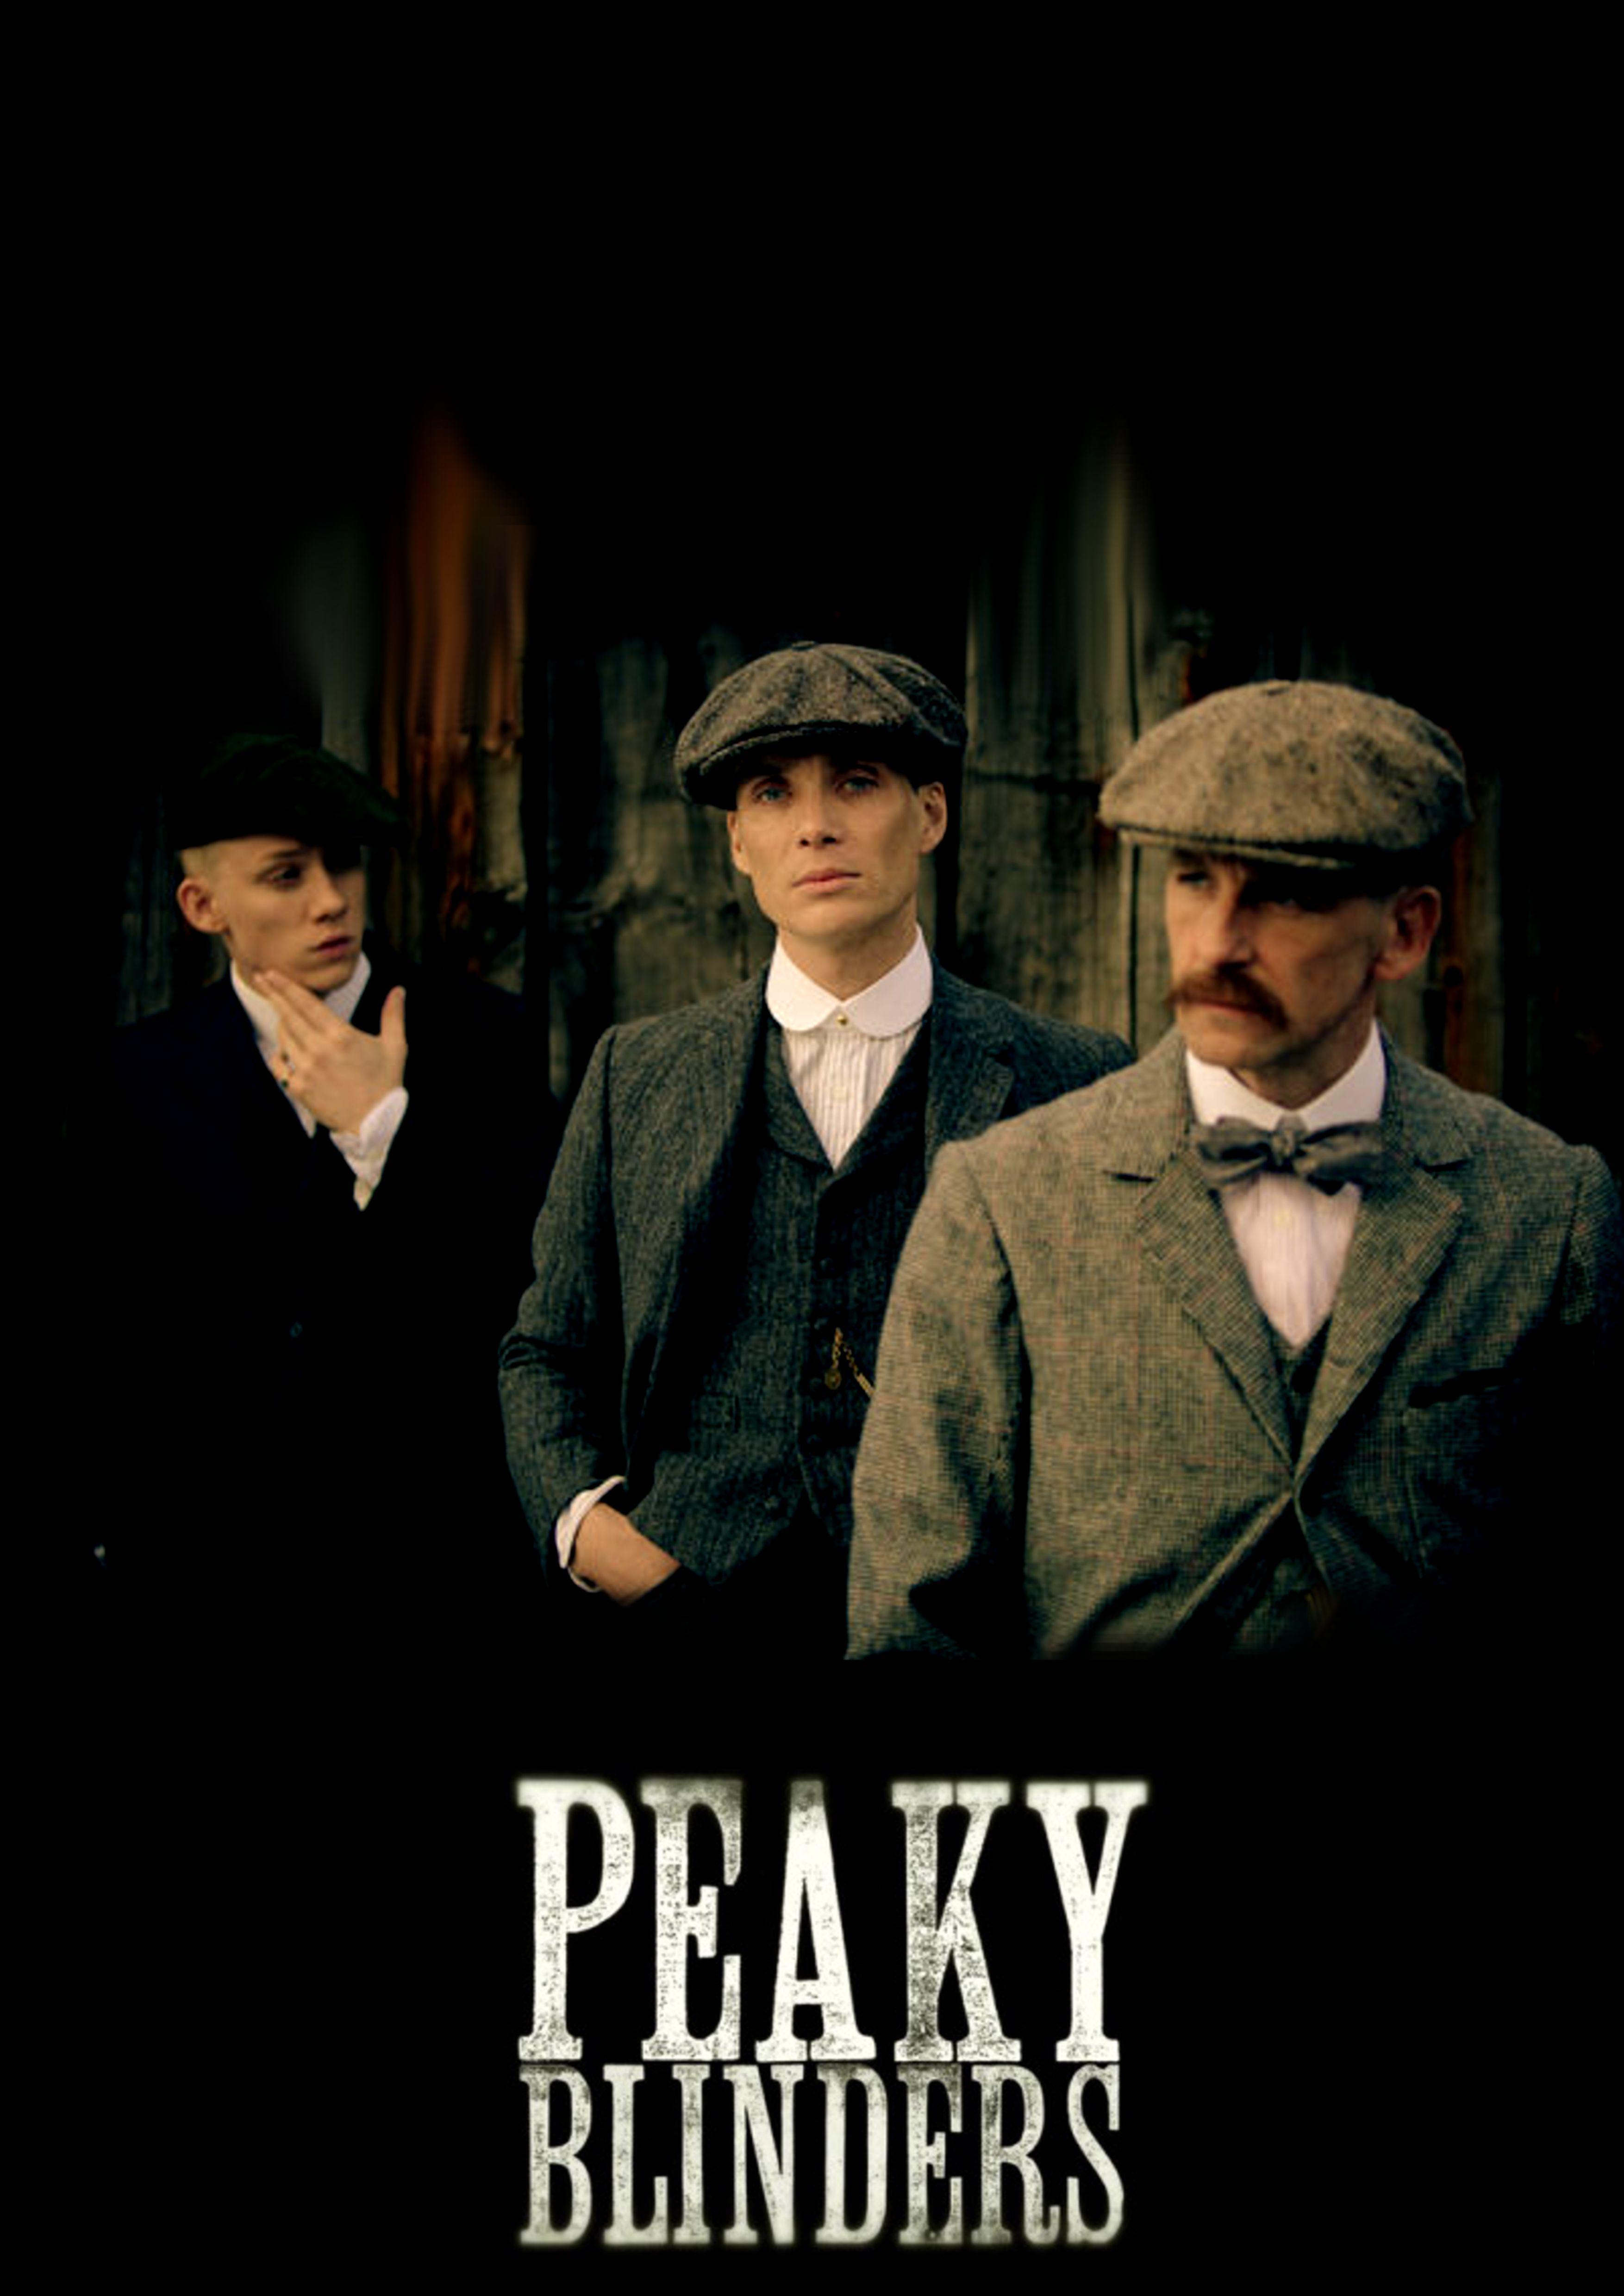 How to get the Peaky Blinders style | Acorn Fabrics